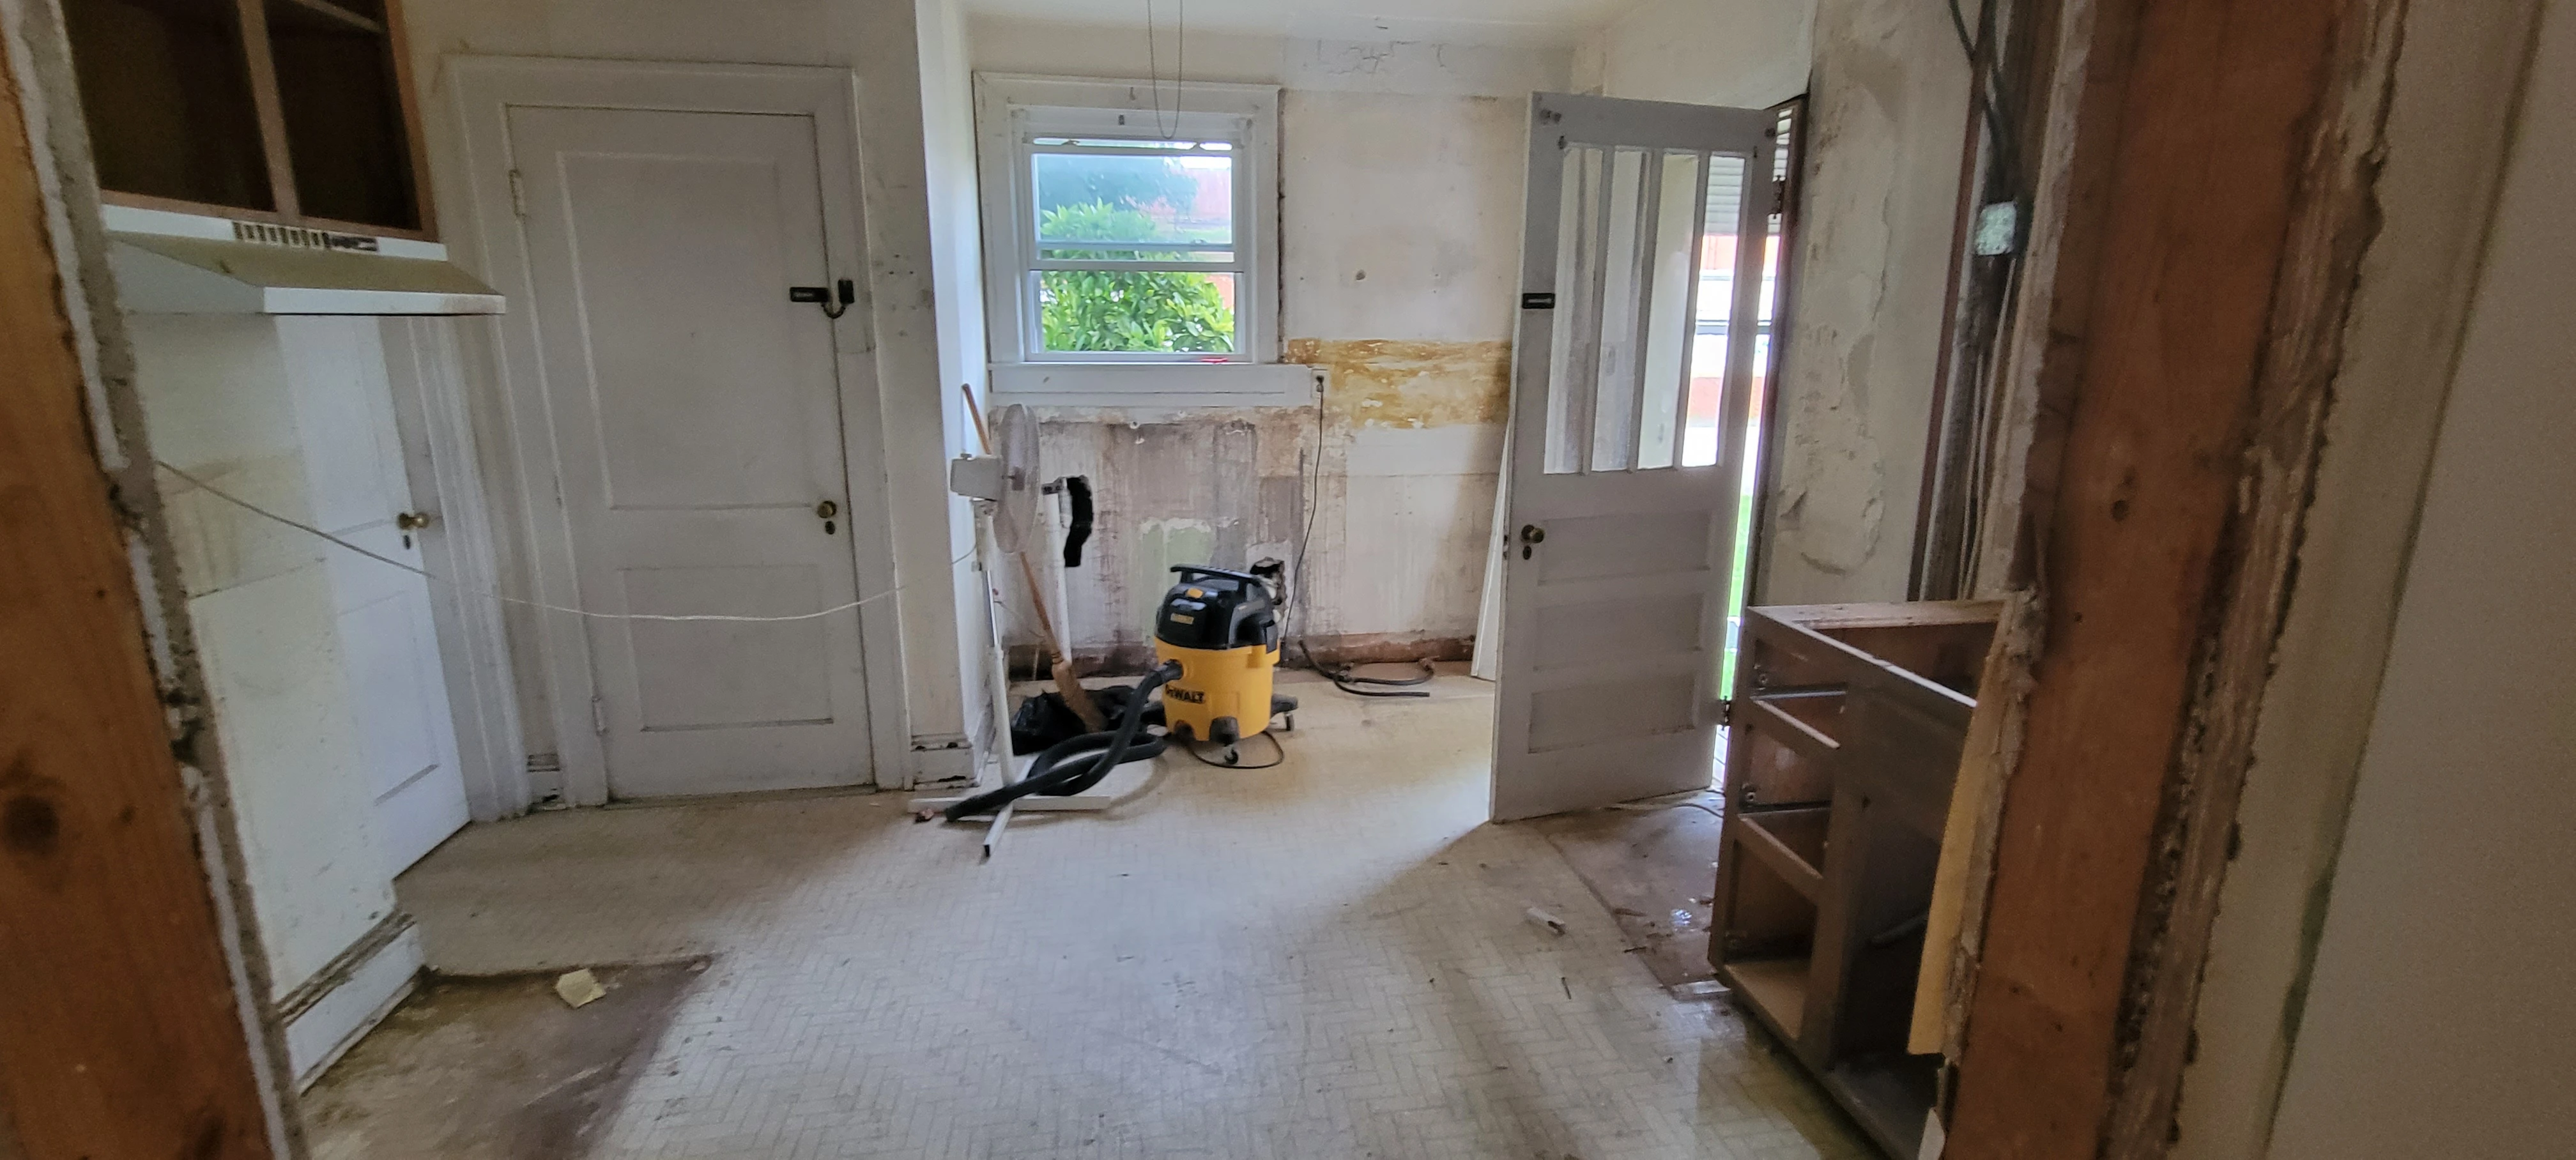 Demo Renovation Picture of Kitchen